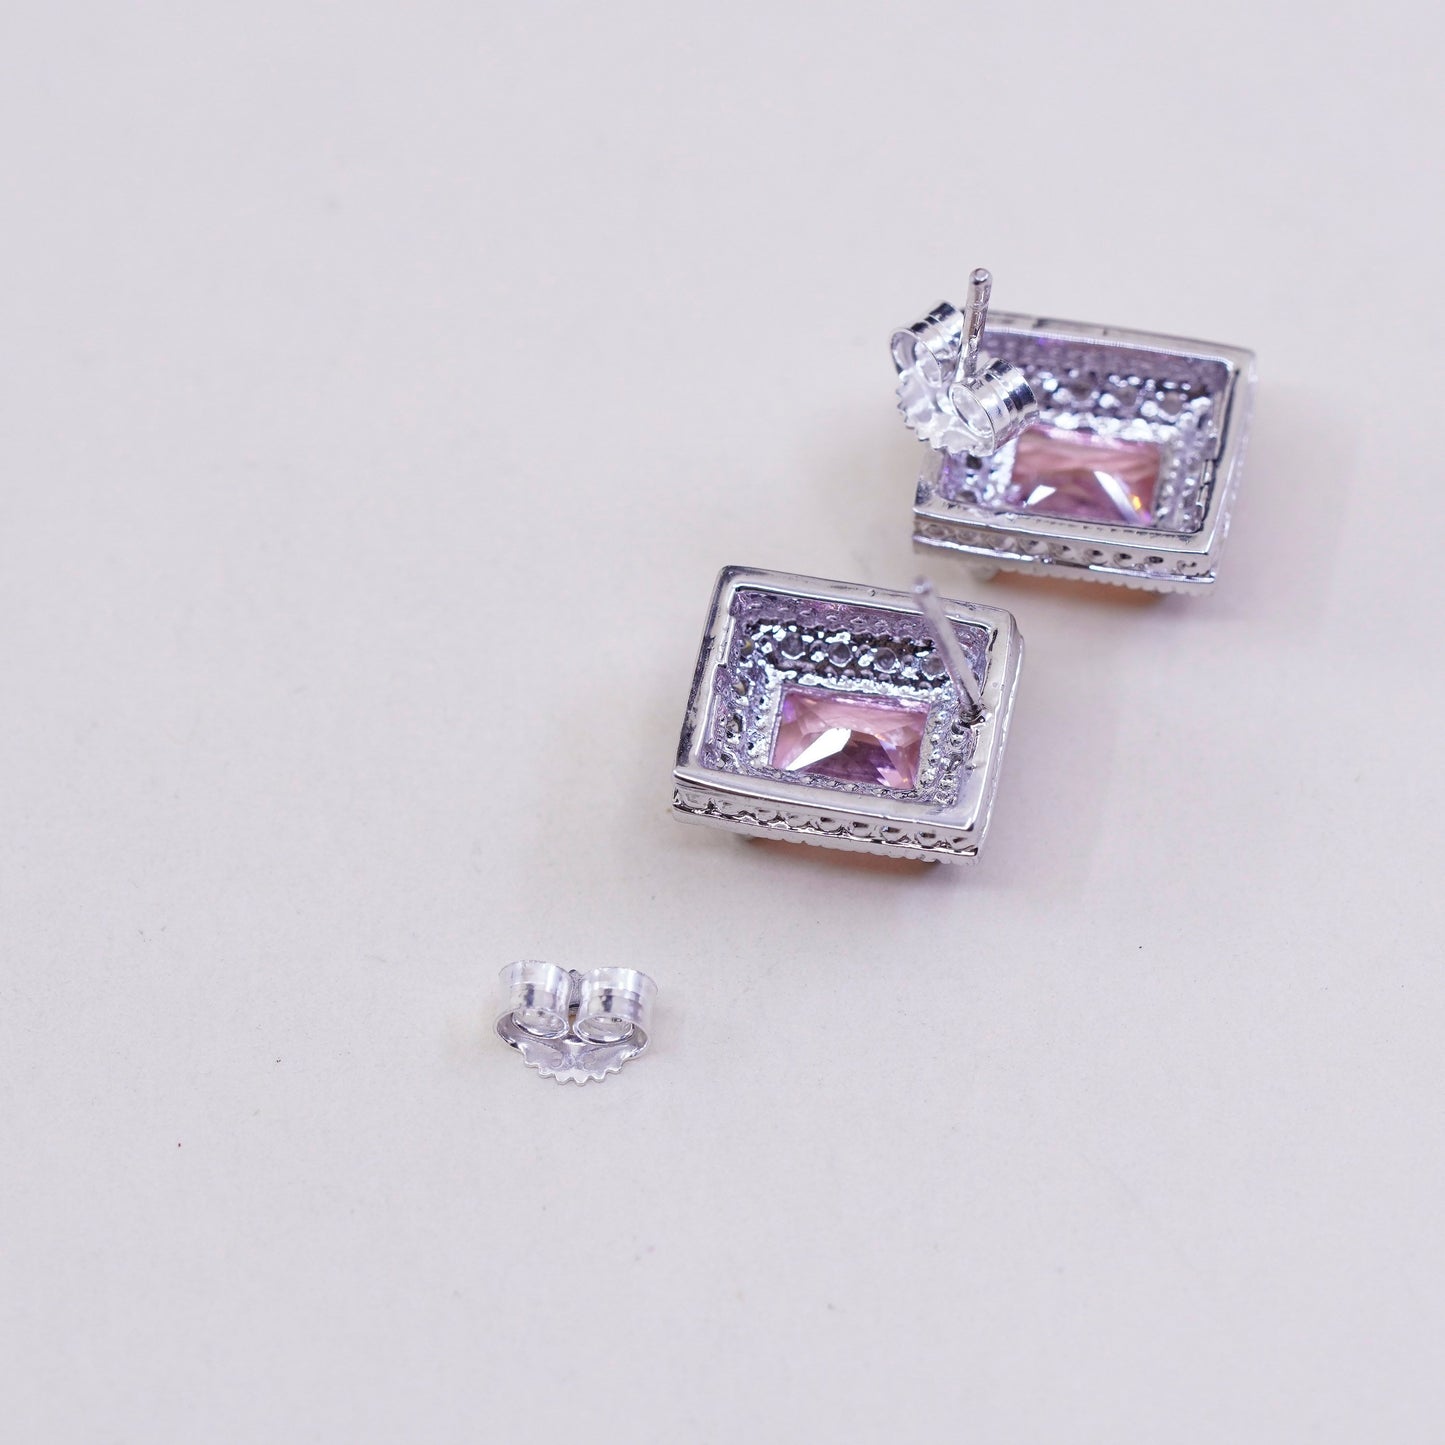 Vintage sterling silver handmade earrings, 925 square studs with pink Cz